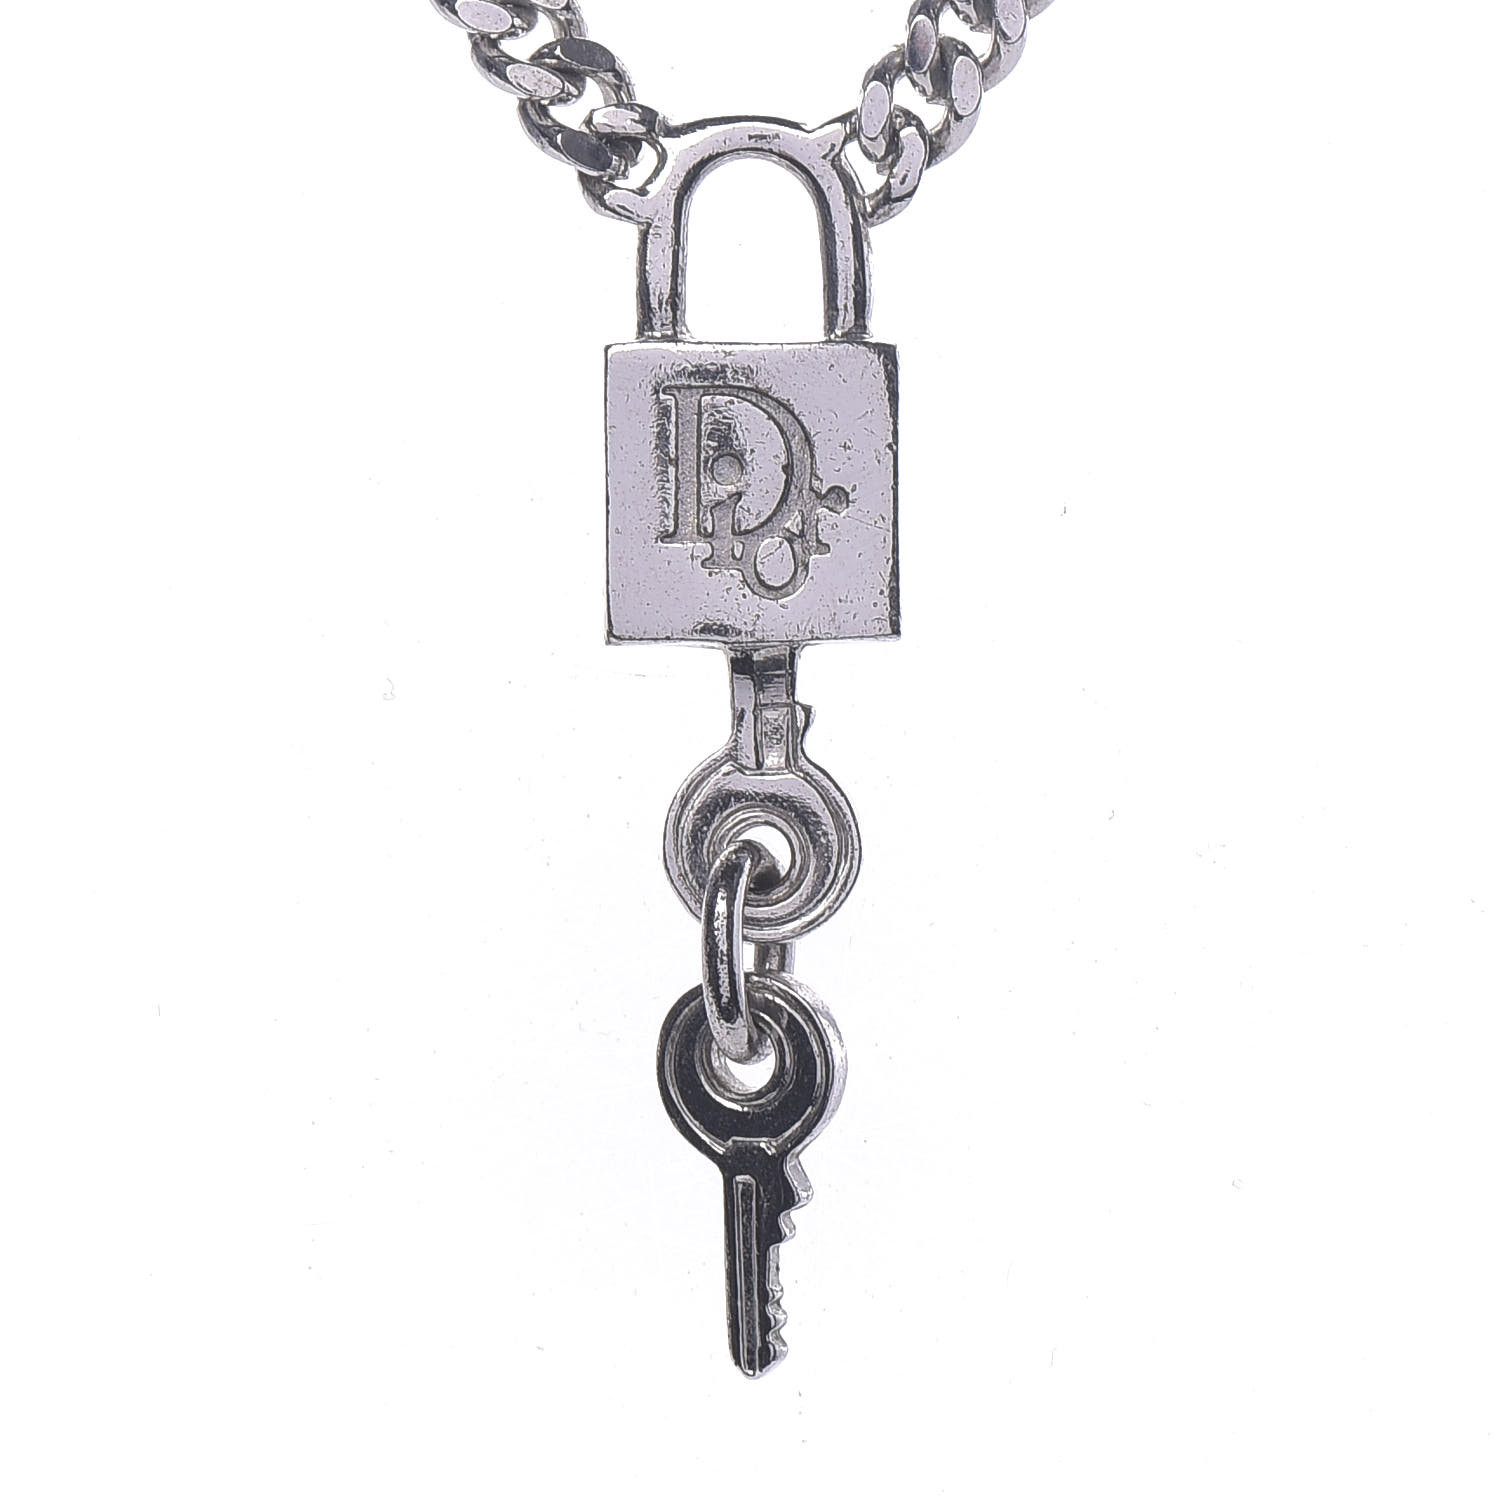 CHRISTIAN DIOR Metal Lock and Key Necklace Silver 633995 | FASHIONPHILE